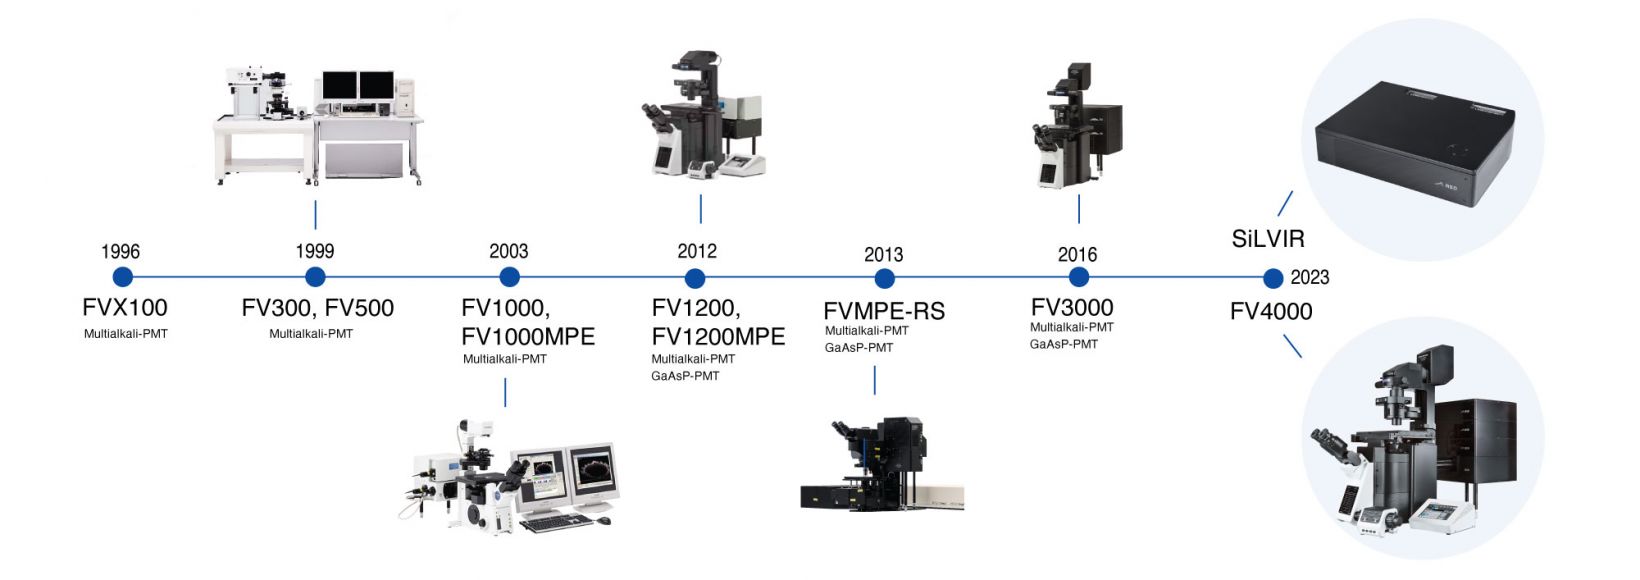 A timeline of confocal microscopy developments first at Olympus and then at Evident culminating in the FV4000 laser confocal microscope.